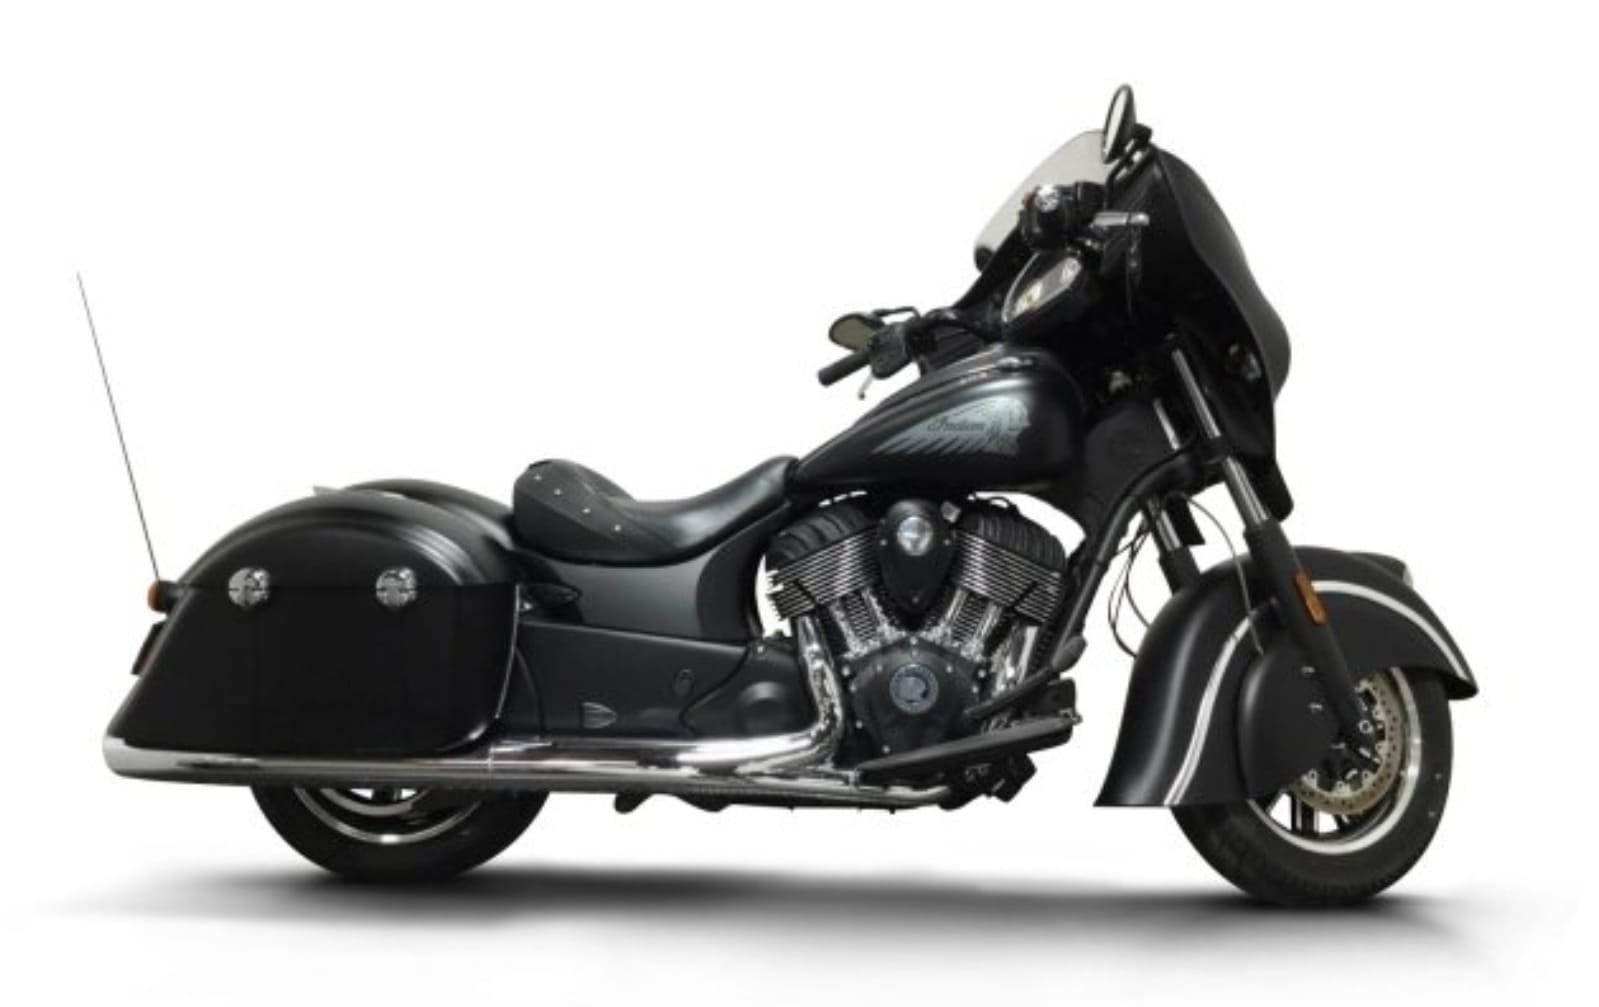 2017 Indian Chieftain Dark Horse Overview